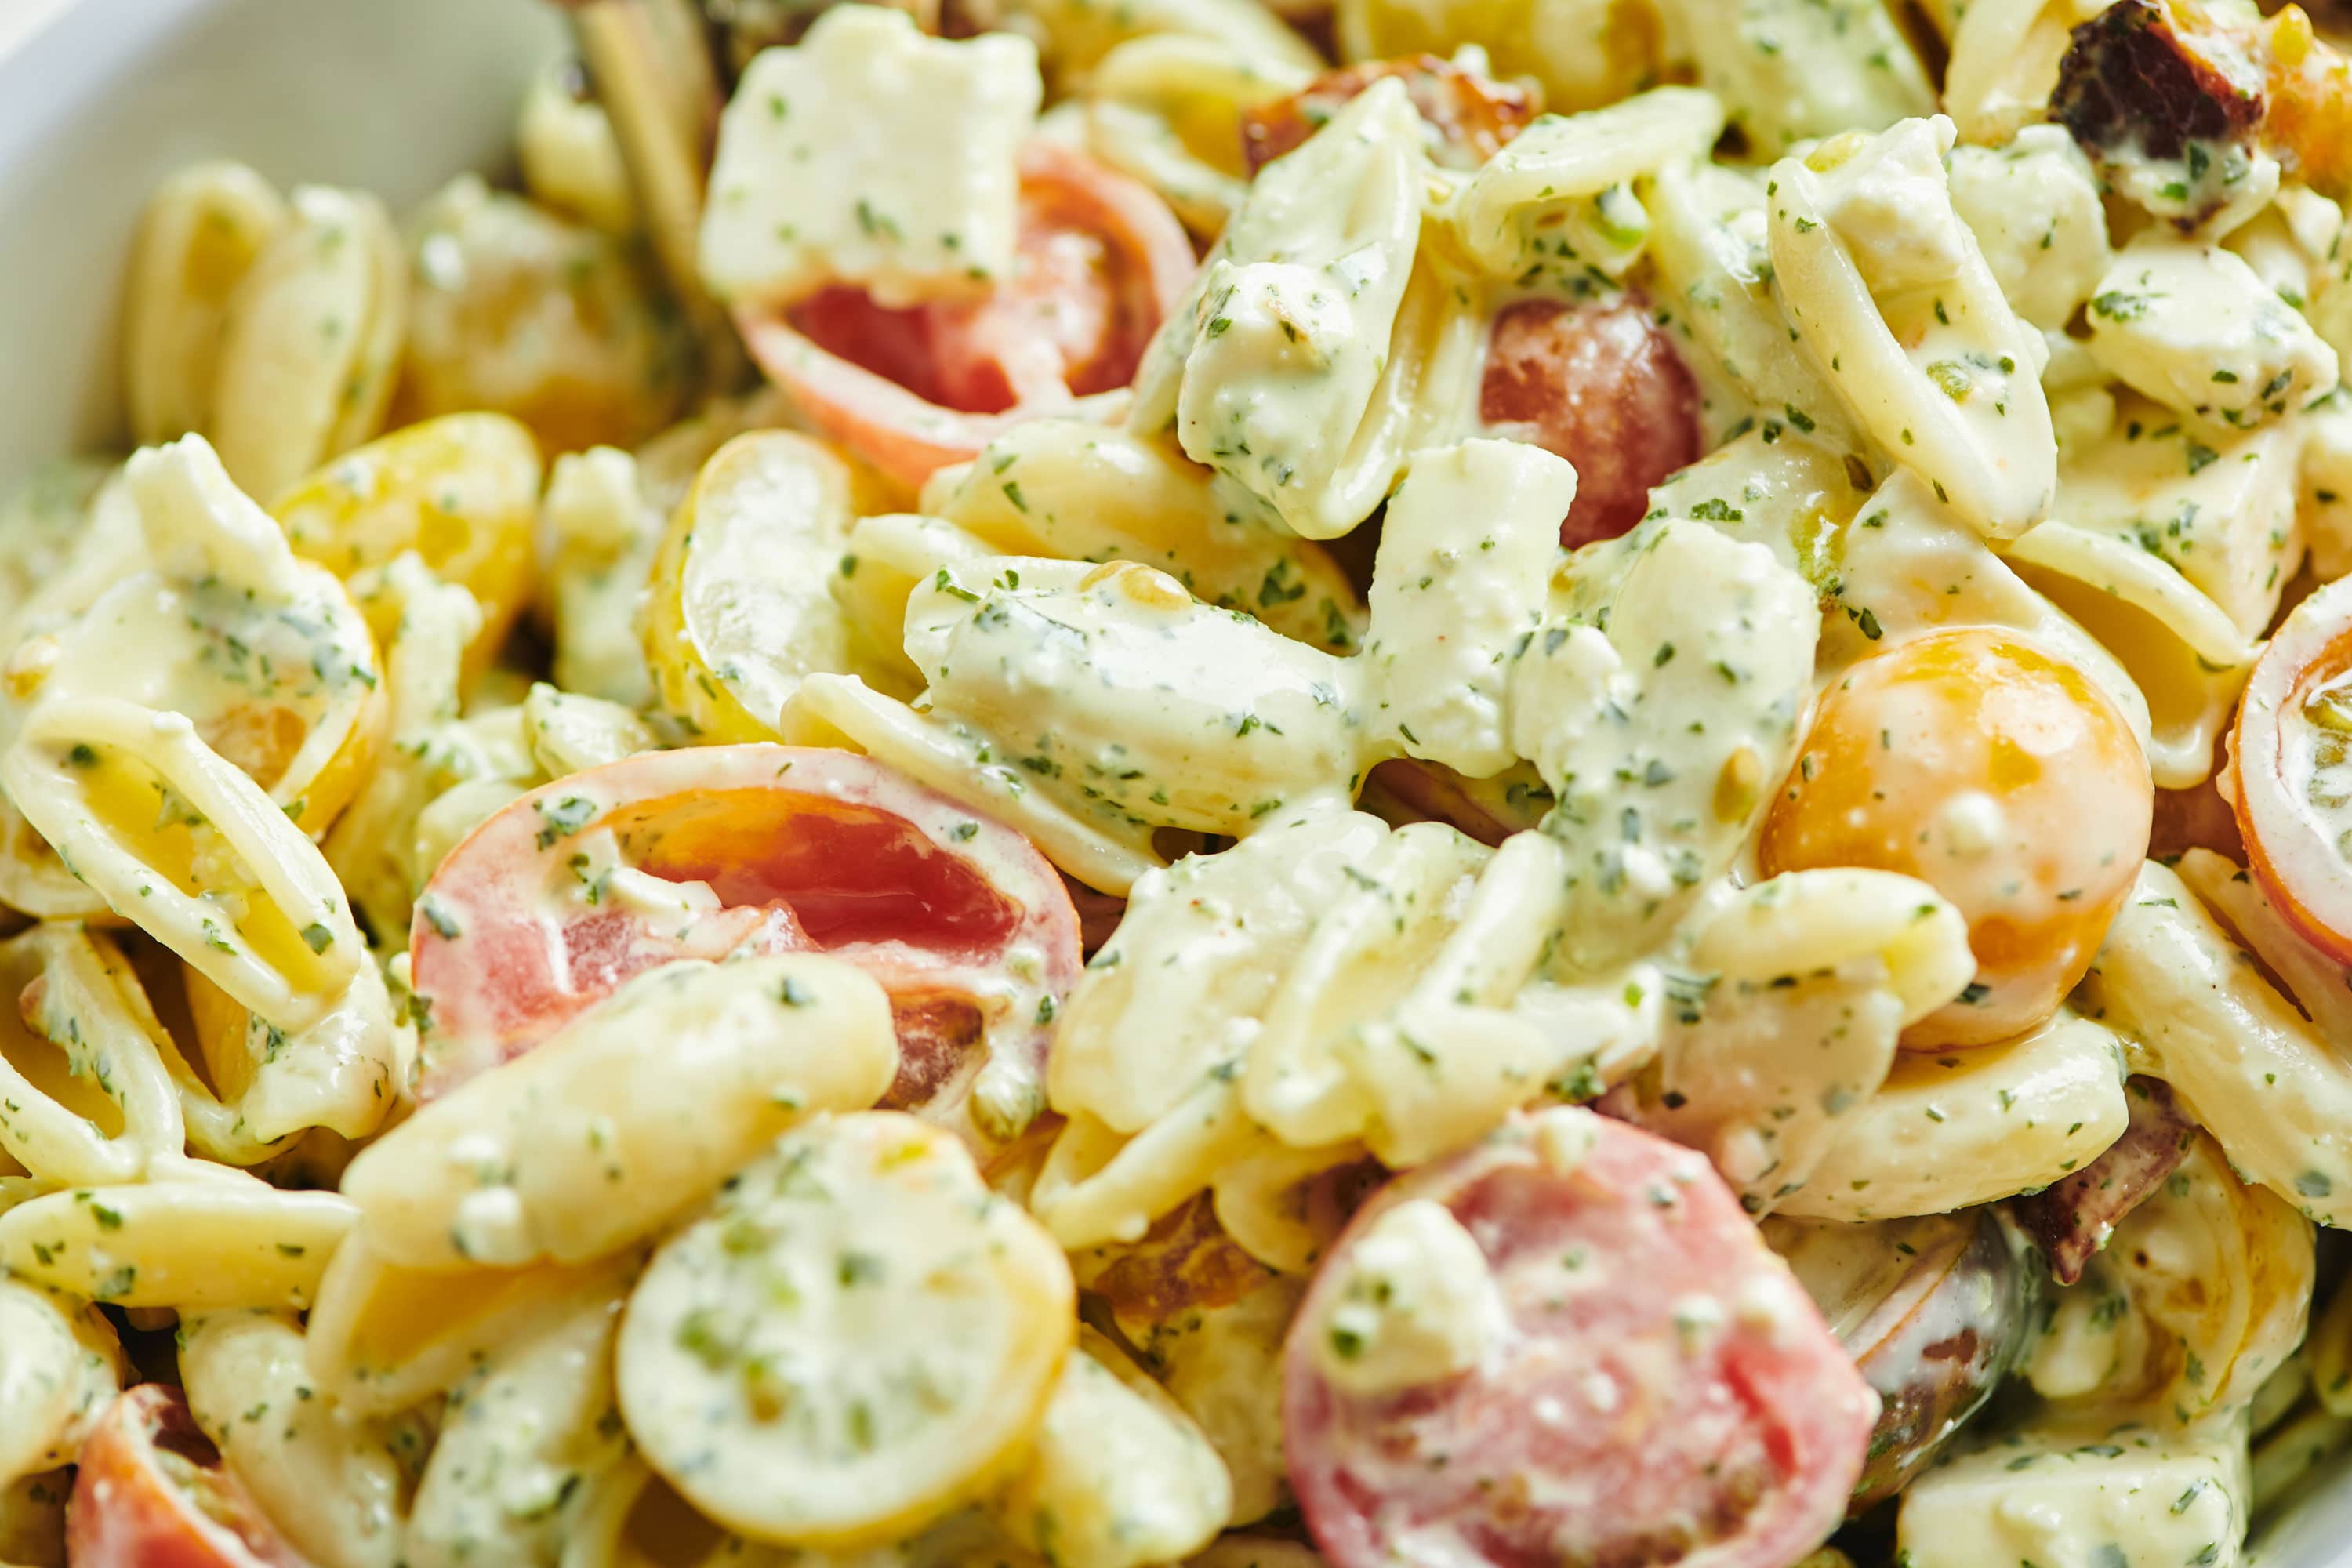 Pasta Salad tossed with Tomatoes, Feta and Herbed Mayonnaise.